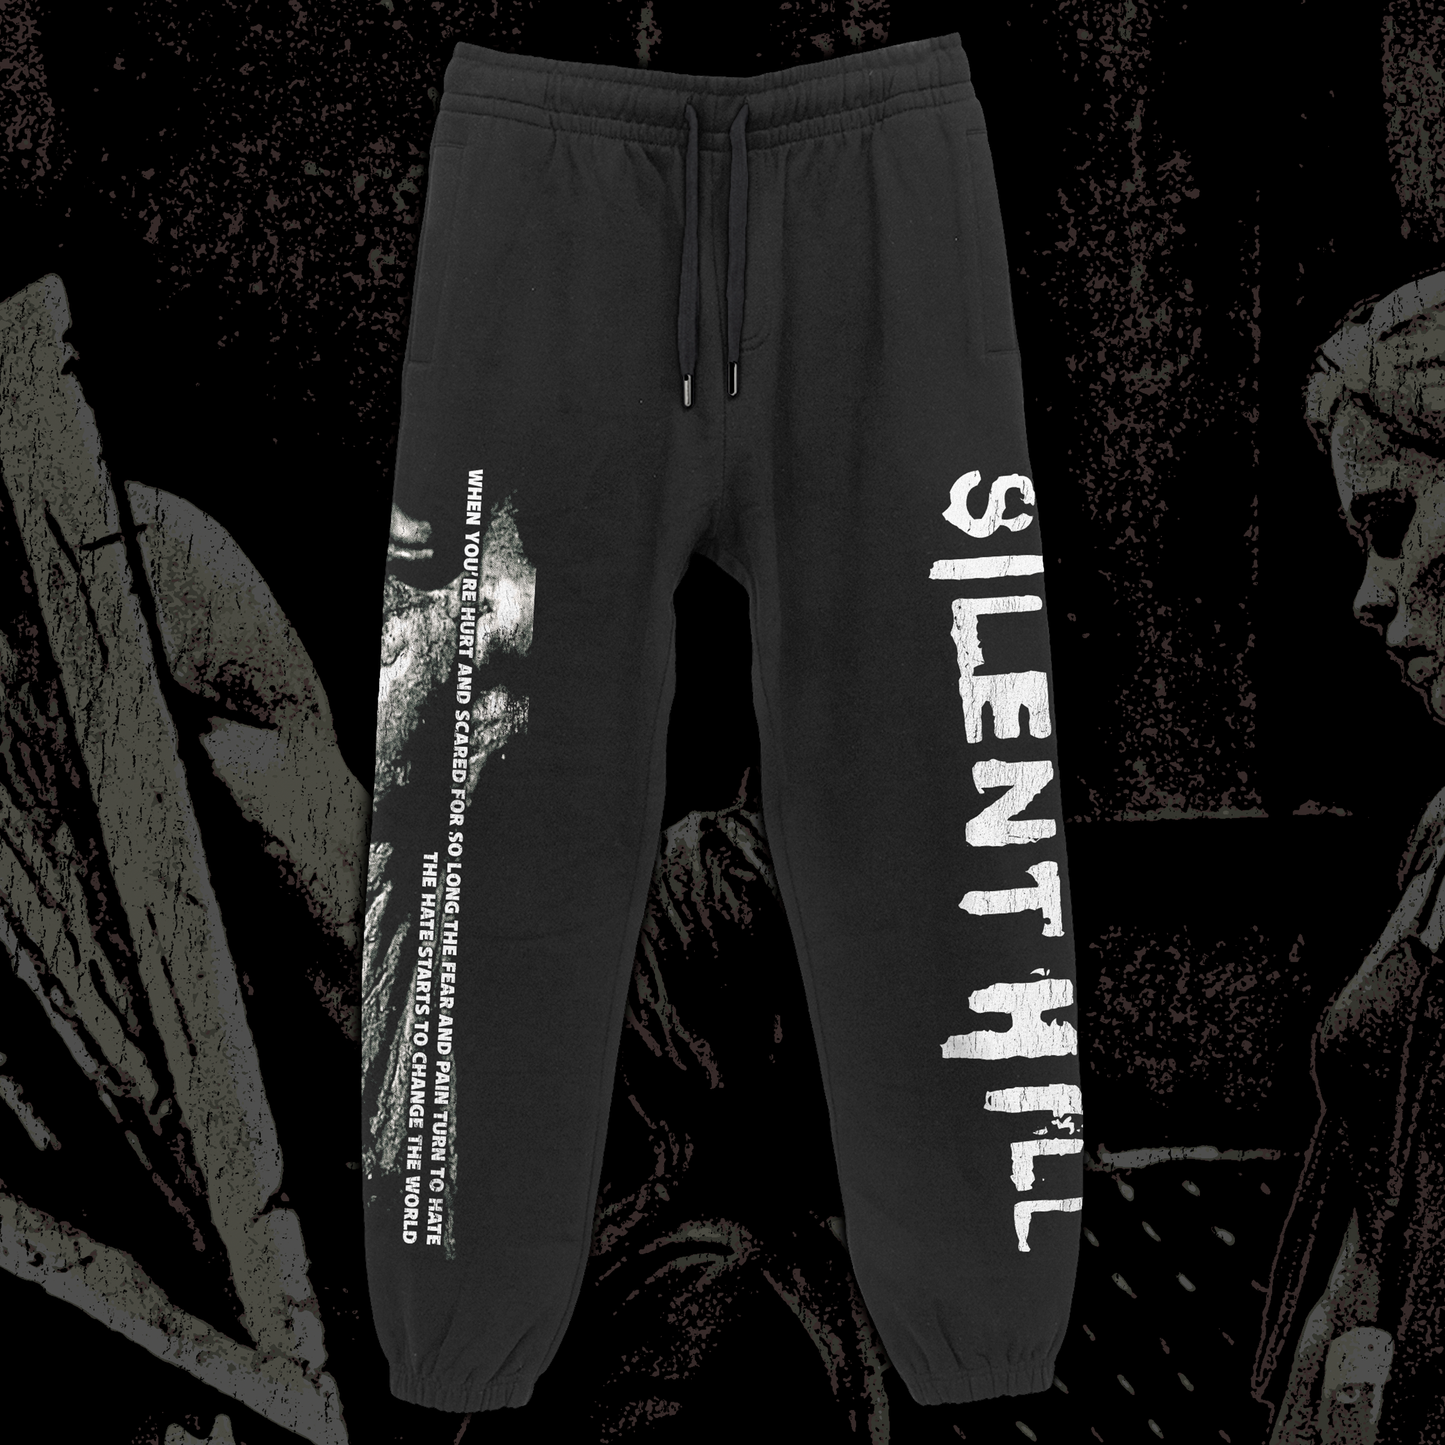 Silent Hill - Hate Changes the World - Sweatpants